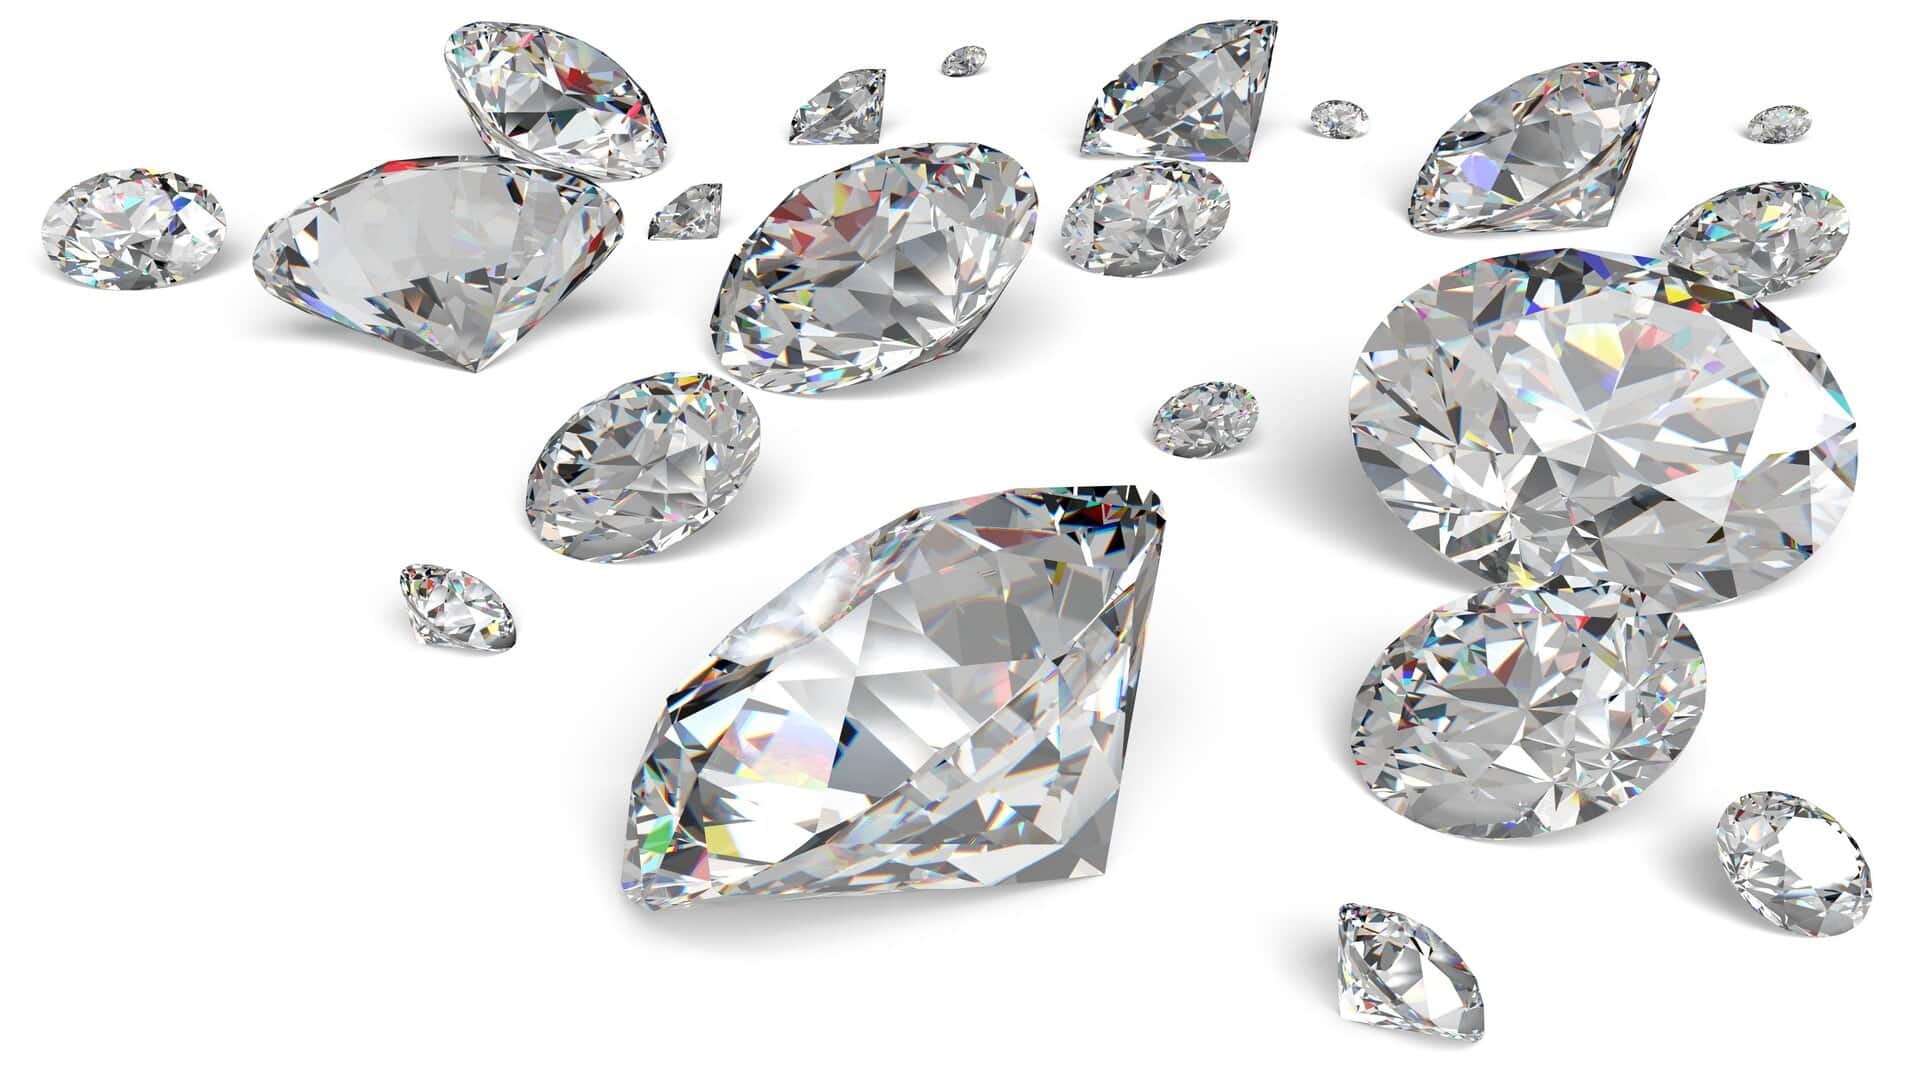 Diamond exporters keen to increase shipments to Southeast Asian markets